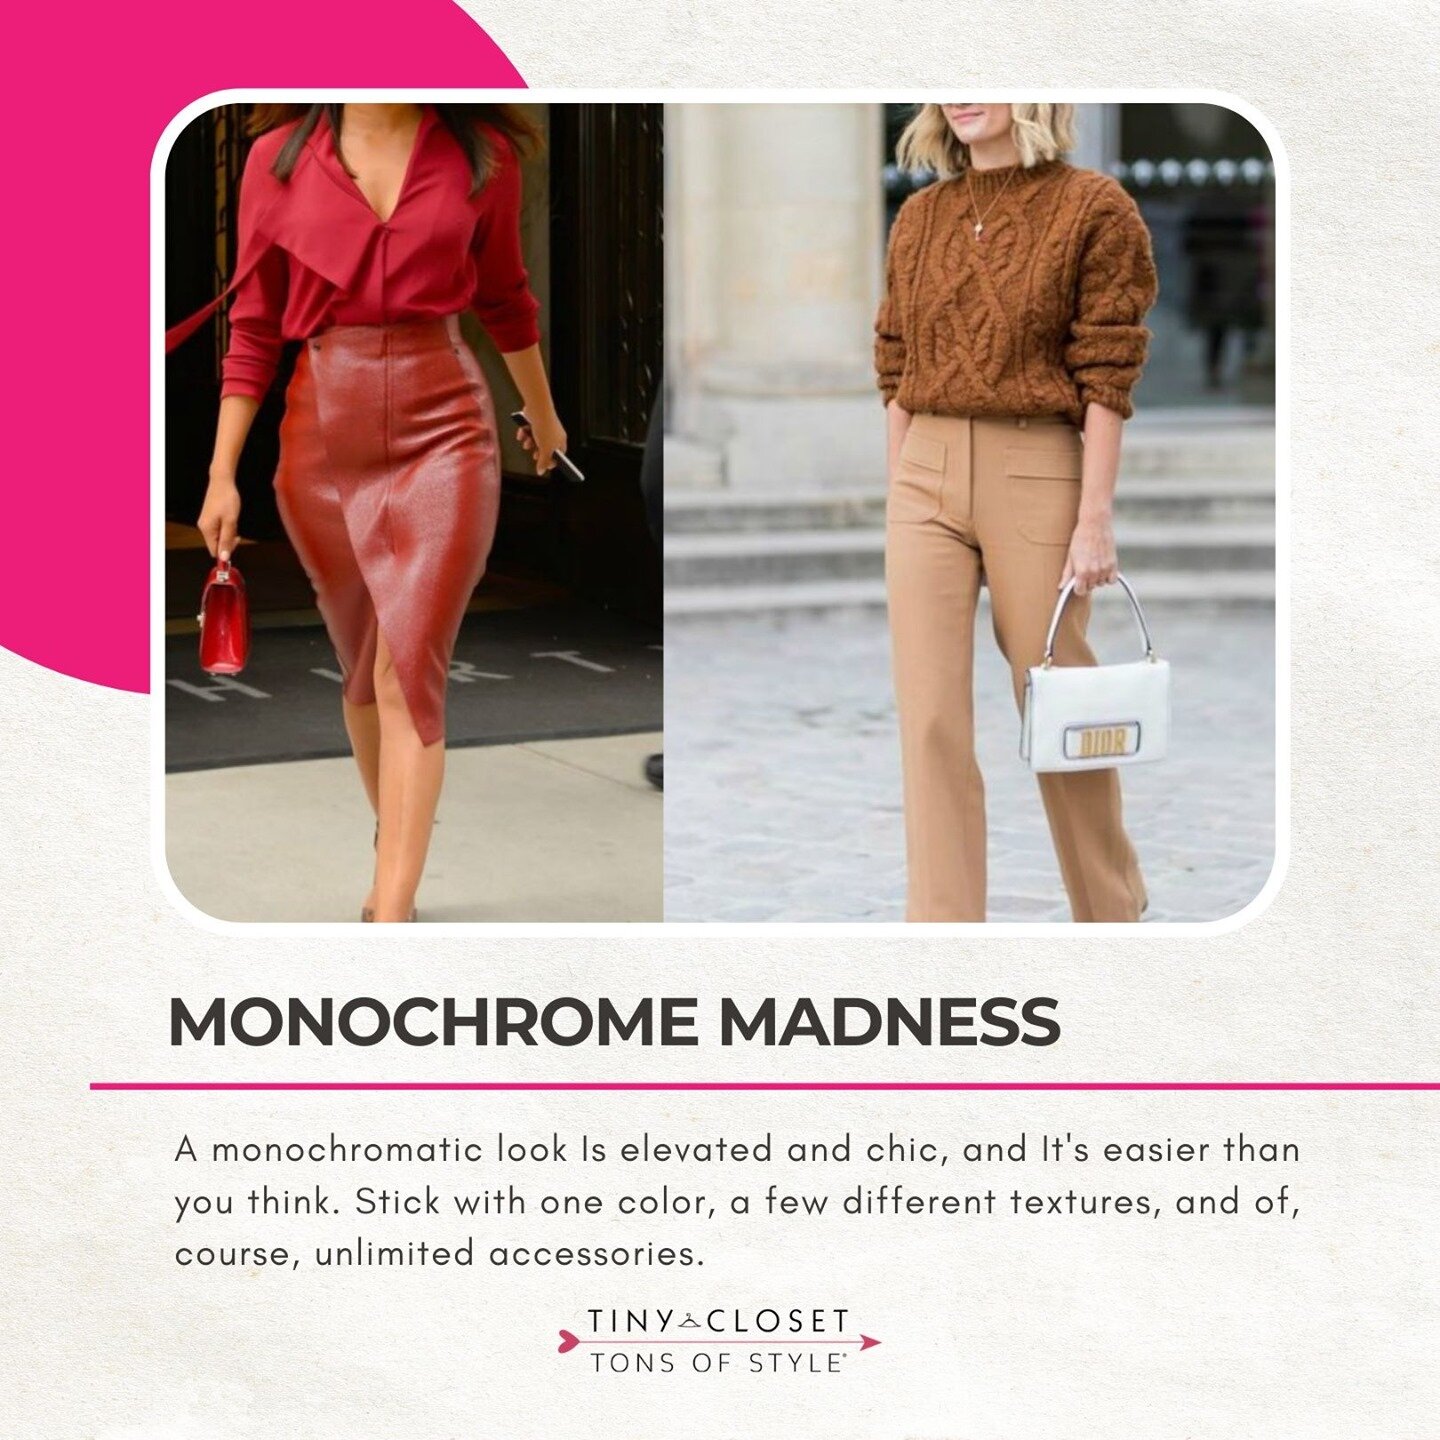 Happy March Ladies. It's a new month. COLOR is back. Lately, I've been MAD for monochrome style. The word &ldquo;monochromatic&rdquo; breaks down into two pieces: &ldquo;mono&rdquo; meaning single and &ldquo;chromatic&rdquo; meaning color.⁣
⁣
Monochr